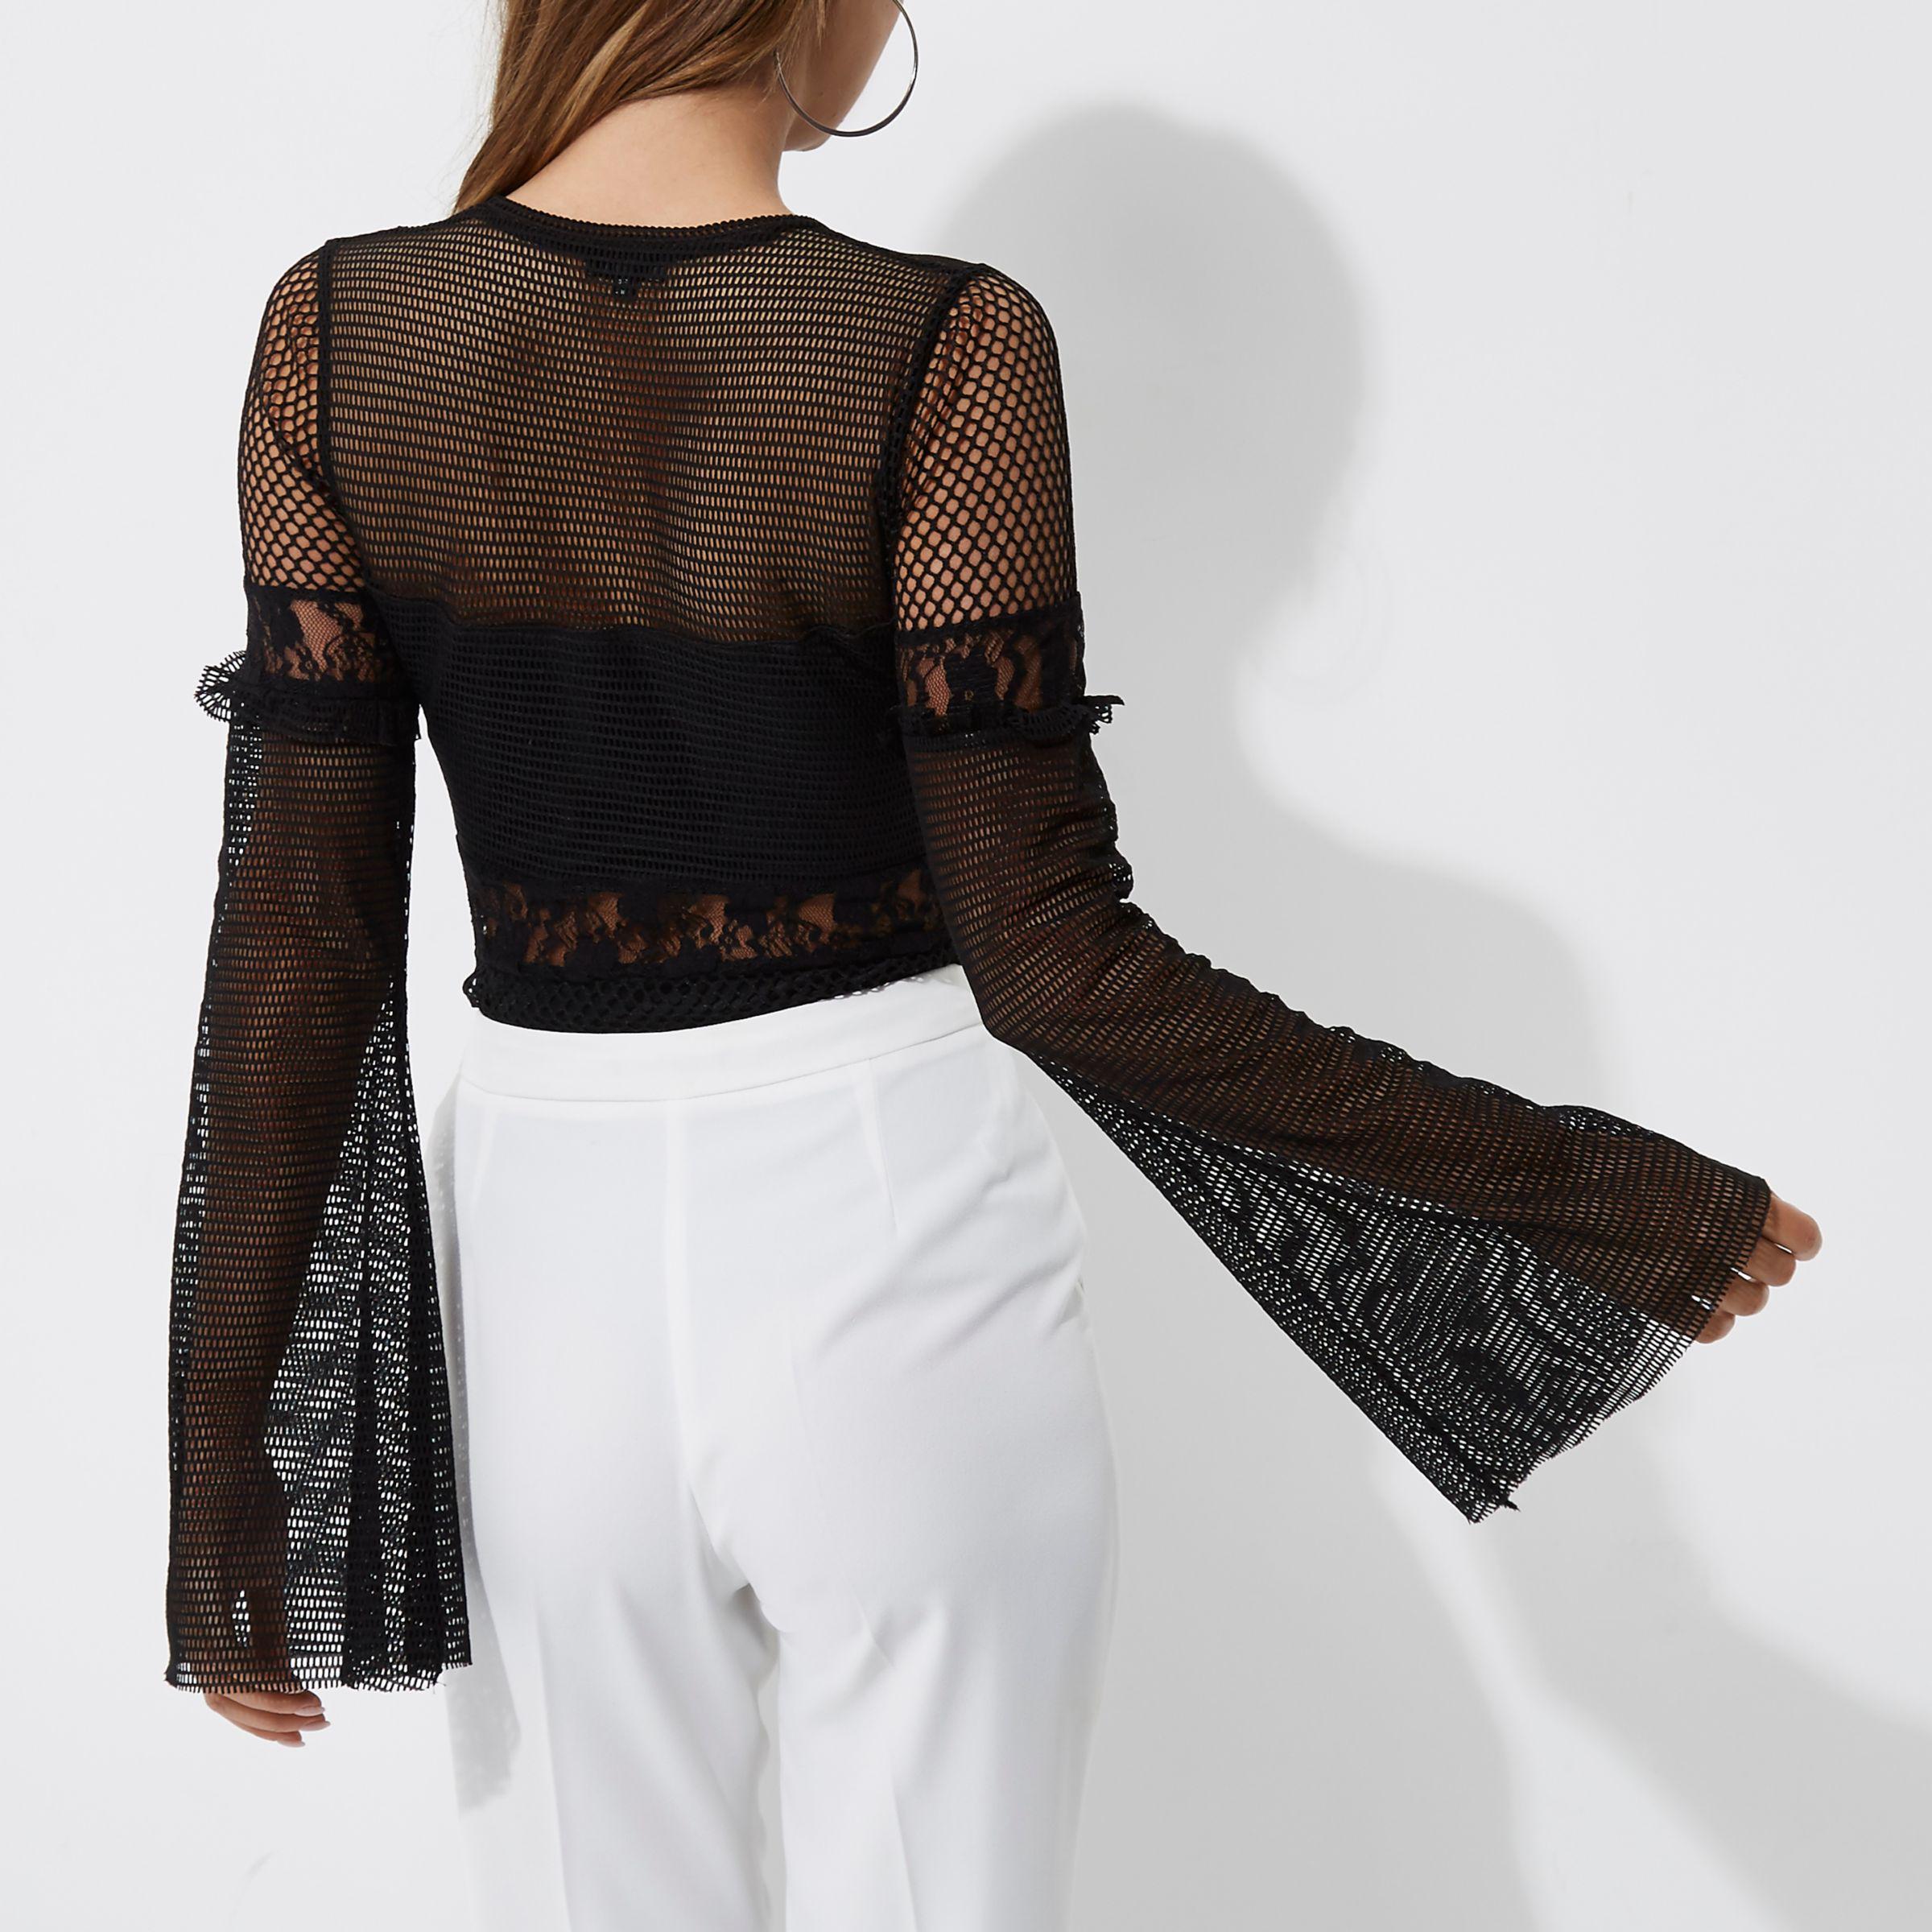 River Island Mesh Lace Insert Long Sleeve Top in Black - Lyst